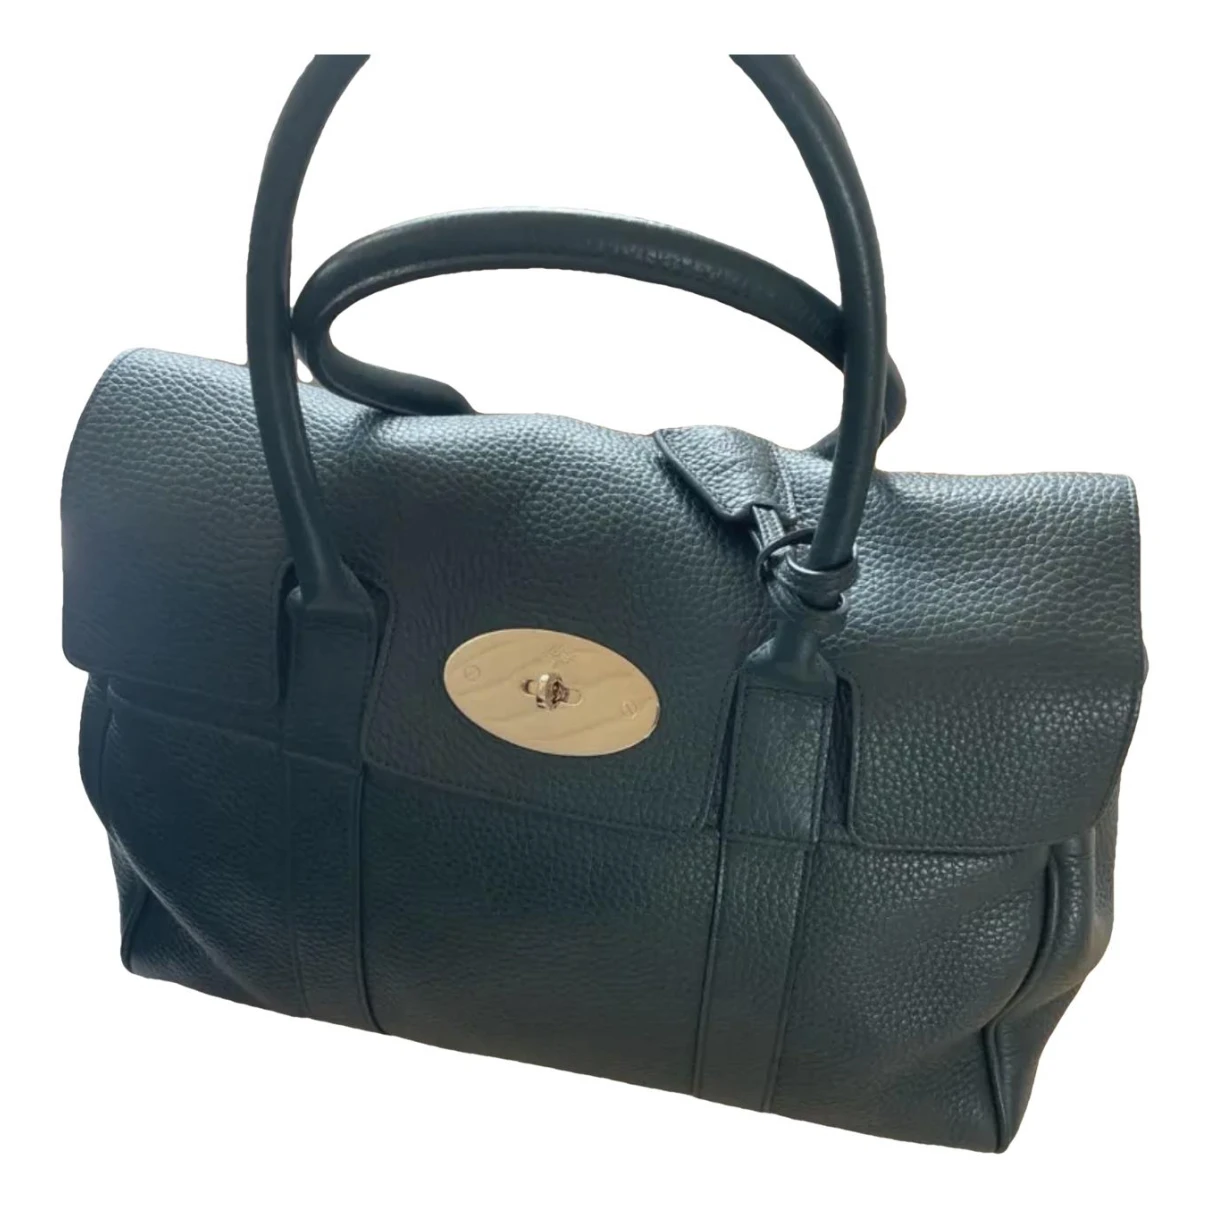 Pre-owned Mulberry Bayswater Leather Handbag In Green